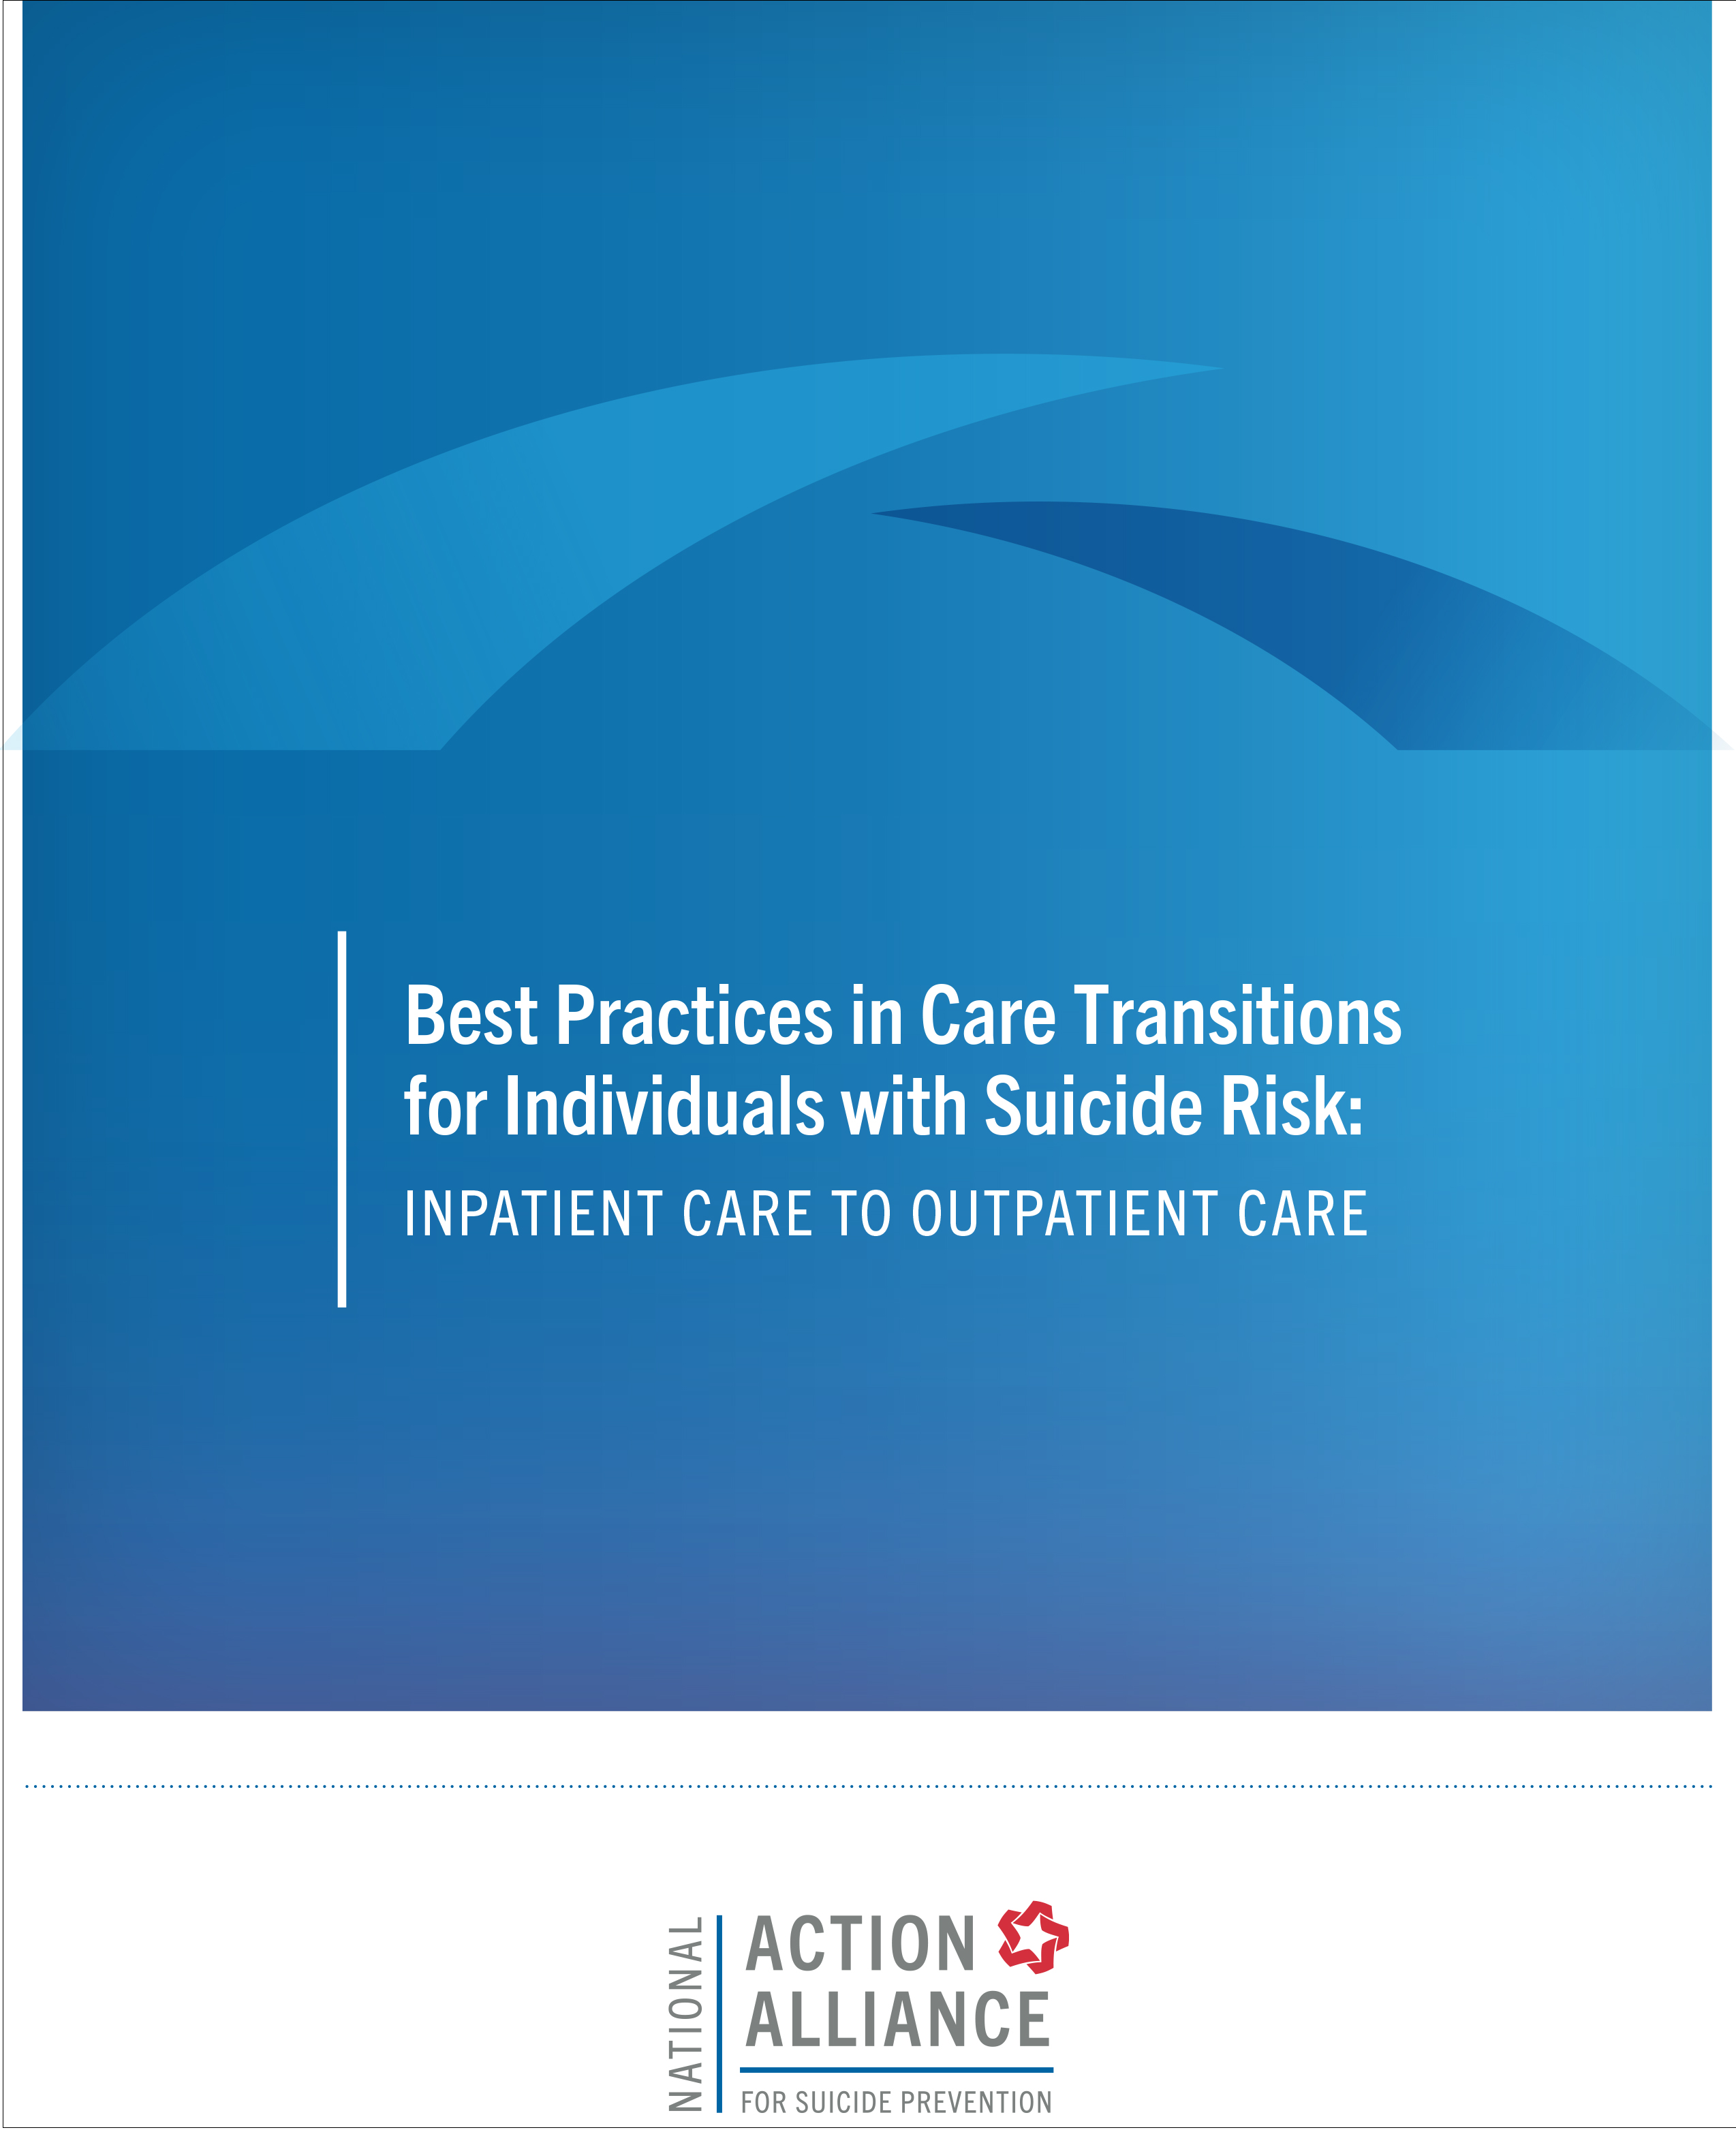 Best Practices in Care Transitions for Individuals with Suicide Risk: Inpatient Care to Outpatient Care